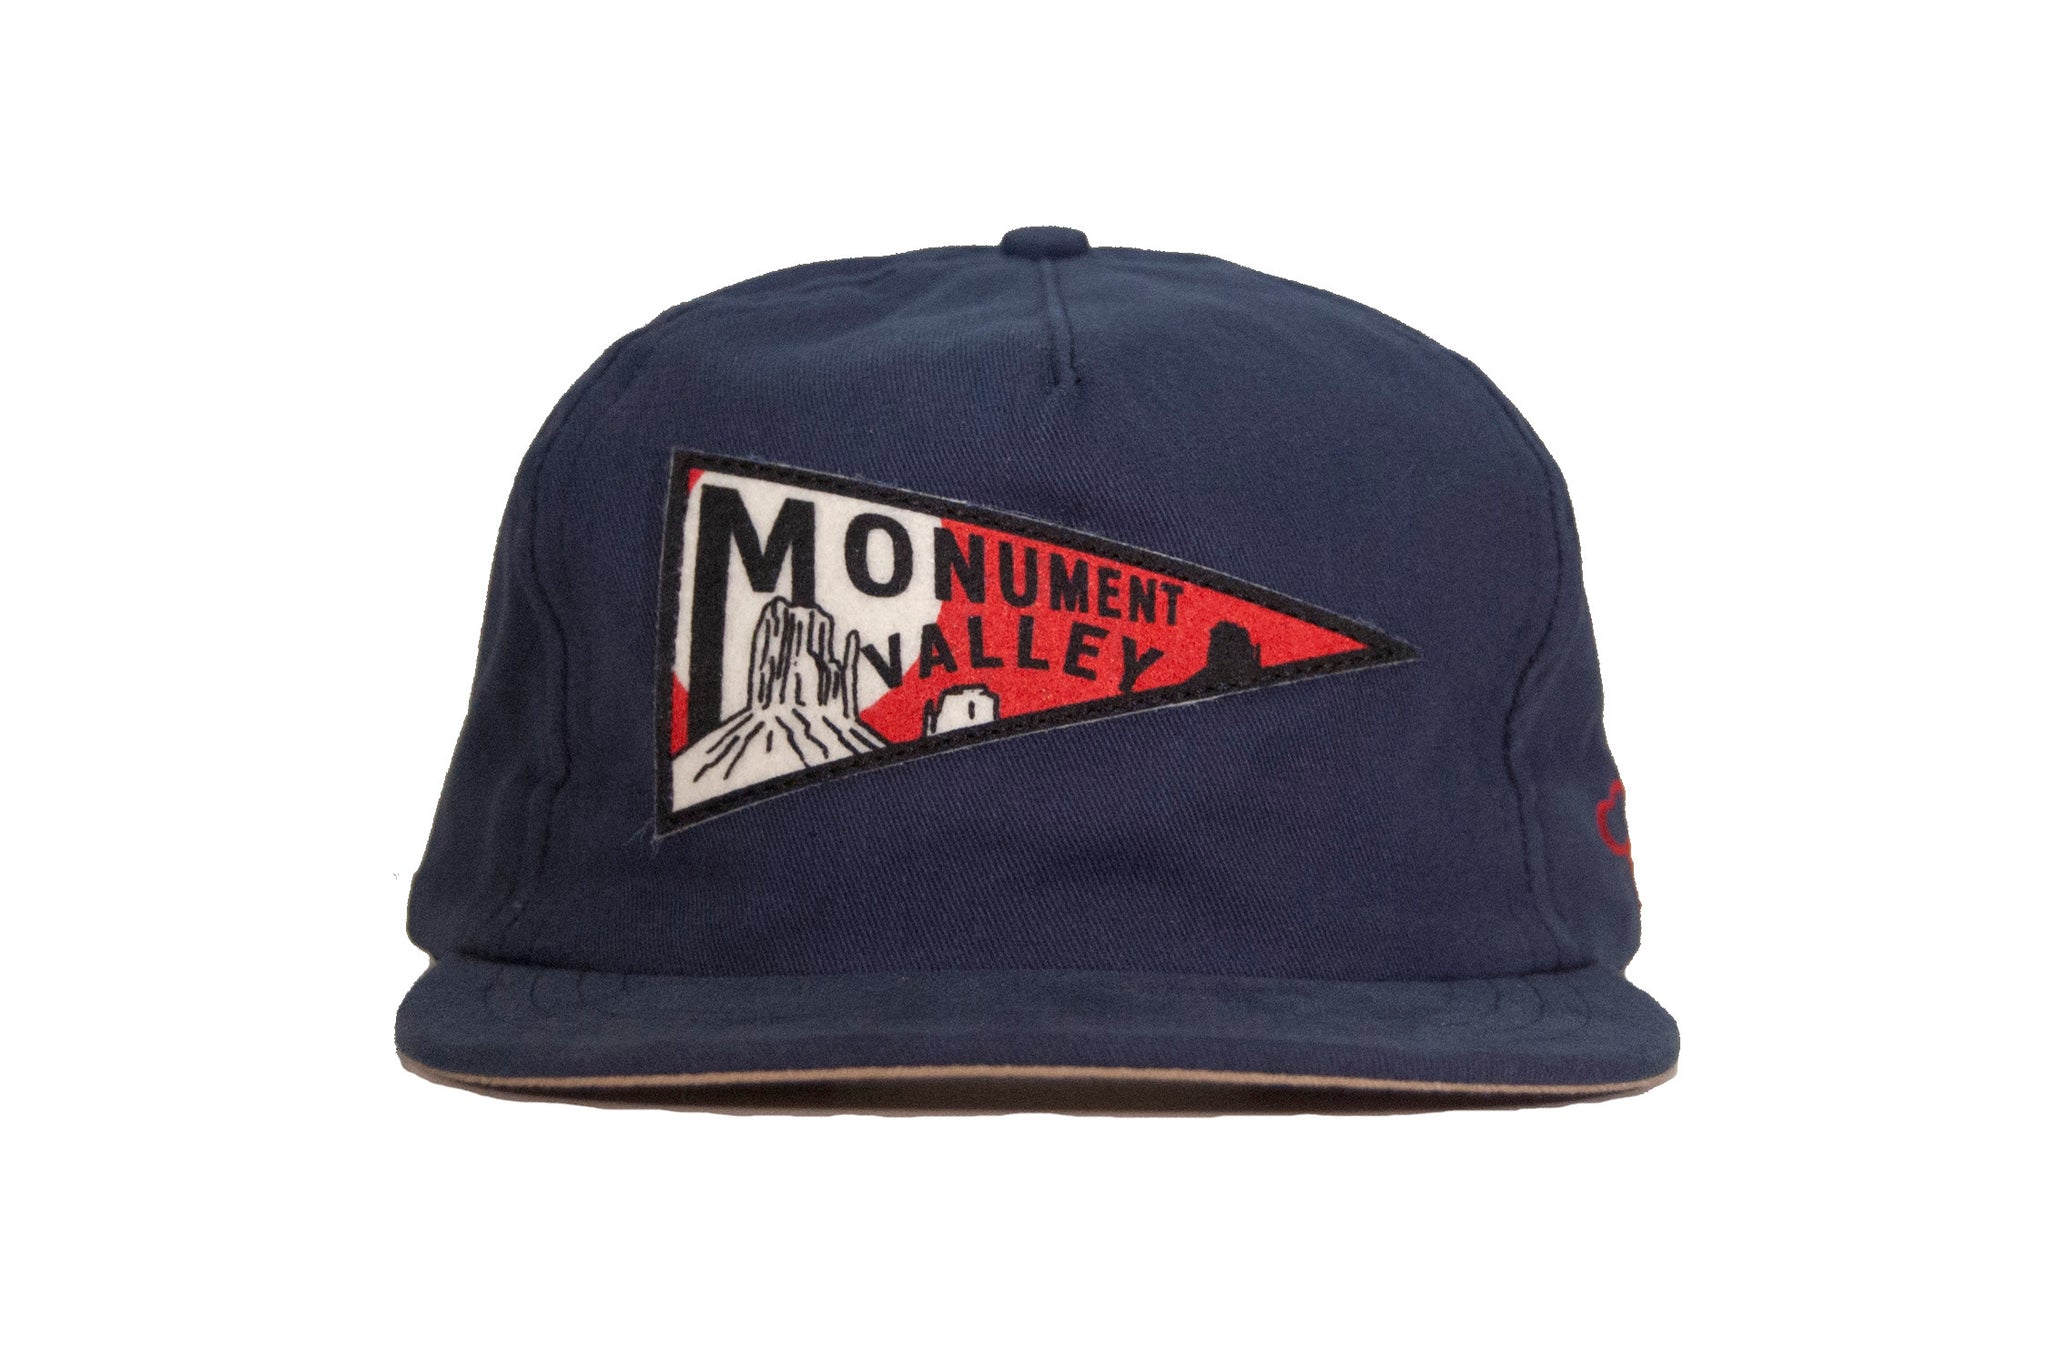 MONUMENT VALLEY Pennant Strapback